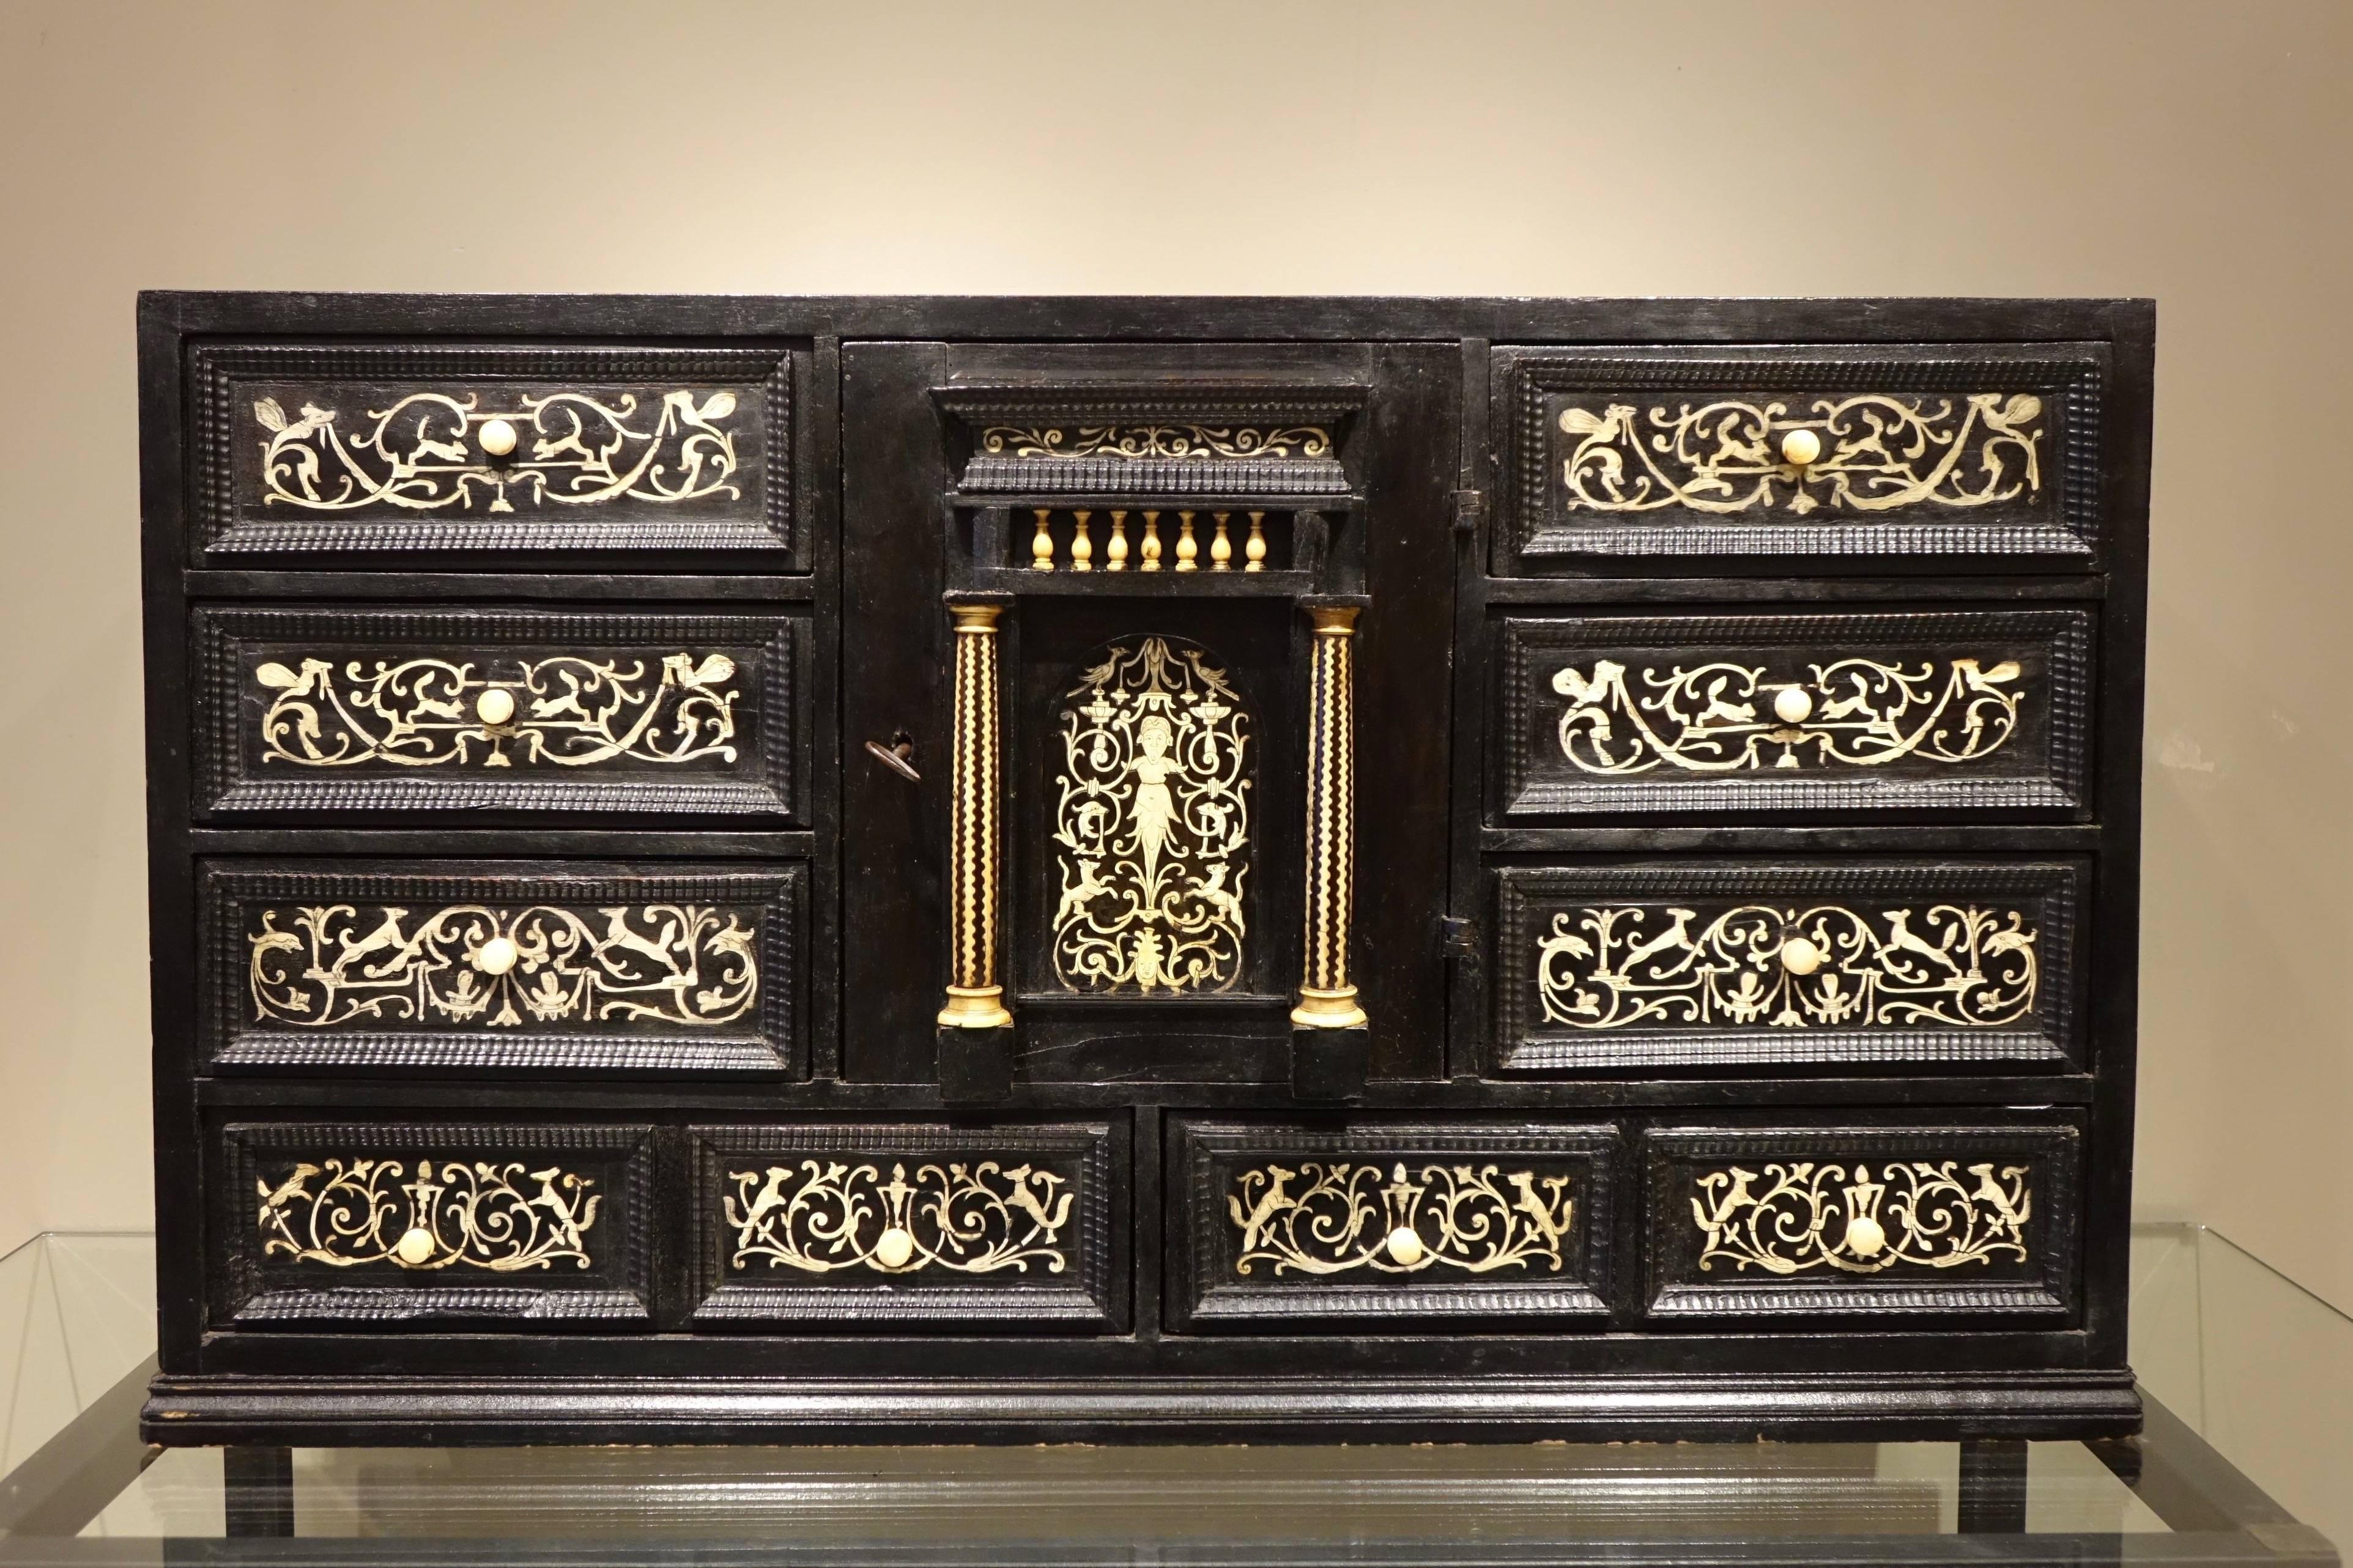 A 17th century ebonized wooden cabinet with inlay, decorated with scrolls, grotesques and fantastic animals.
Northern Italy
Wooden core of coniferous, inside drawers and slides in oak, molding of drawers in ebony.
Eight drawers in the front.
A